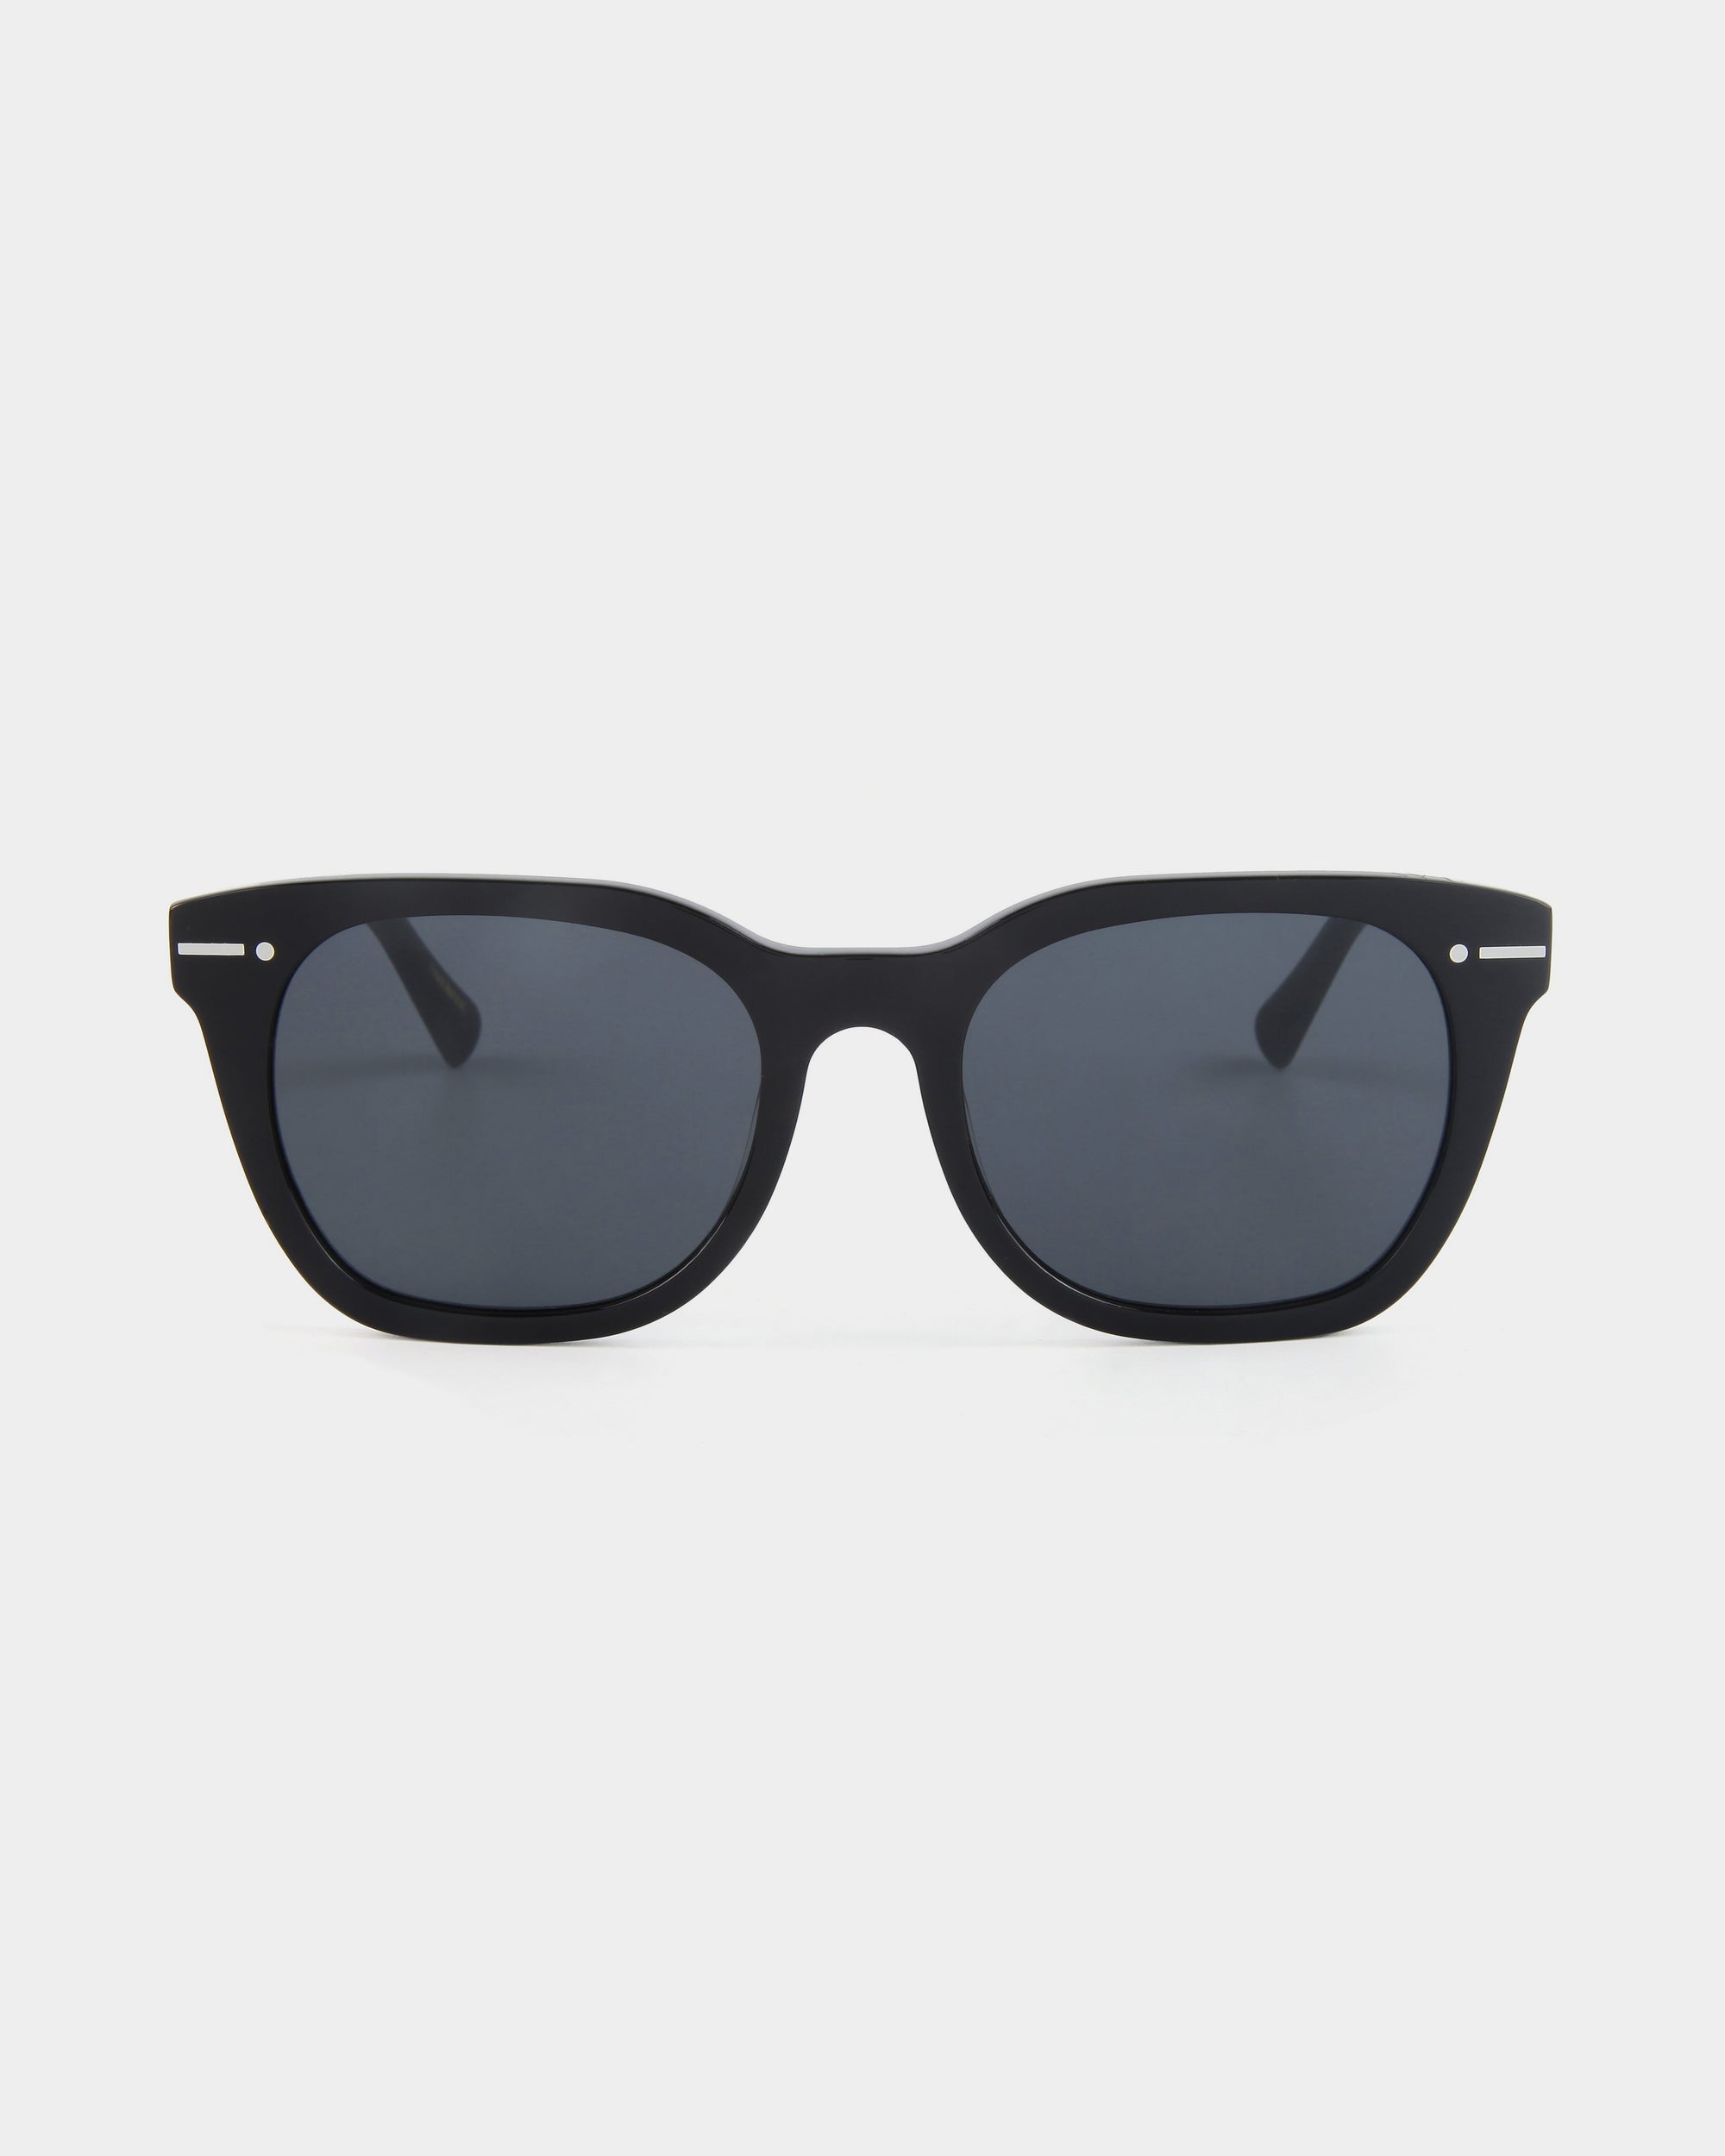 A pair of black rectangular For Art's Sake® Jacuzzi sunglasses with dark tinted Nylon lenses is displayed against a plain white background. The frame, made of Mazzucchelli acetate, is matte black with subtle silver accents near the hinges. These sunglasses offer classic minimalist style and complete UVA & UVB protection.